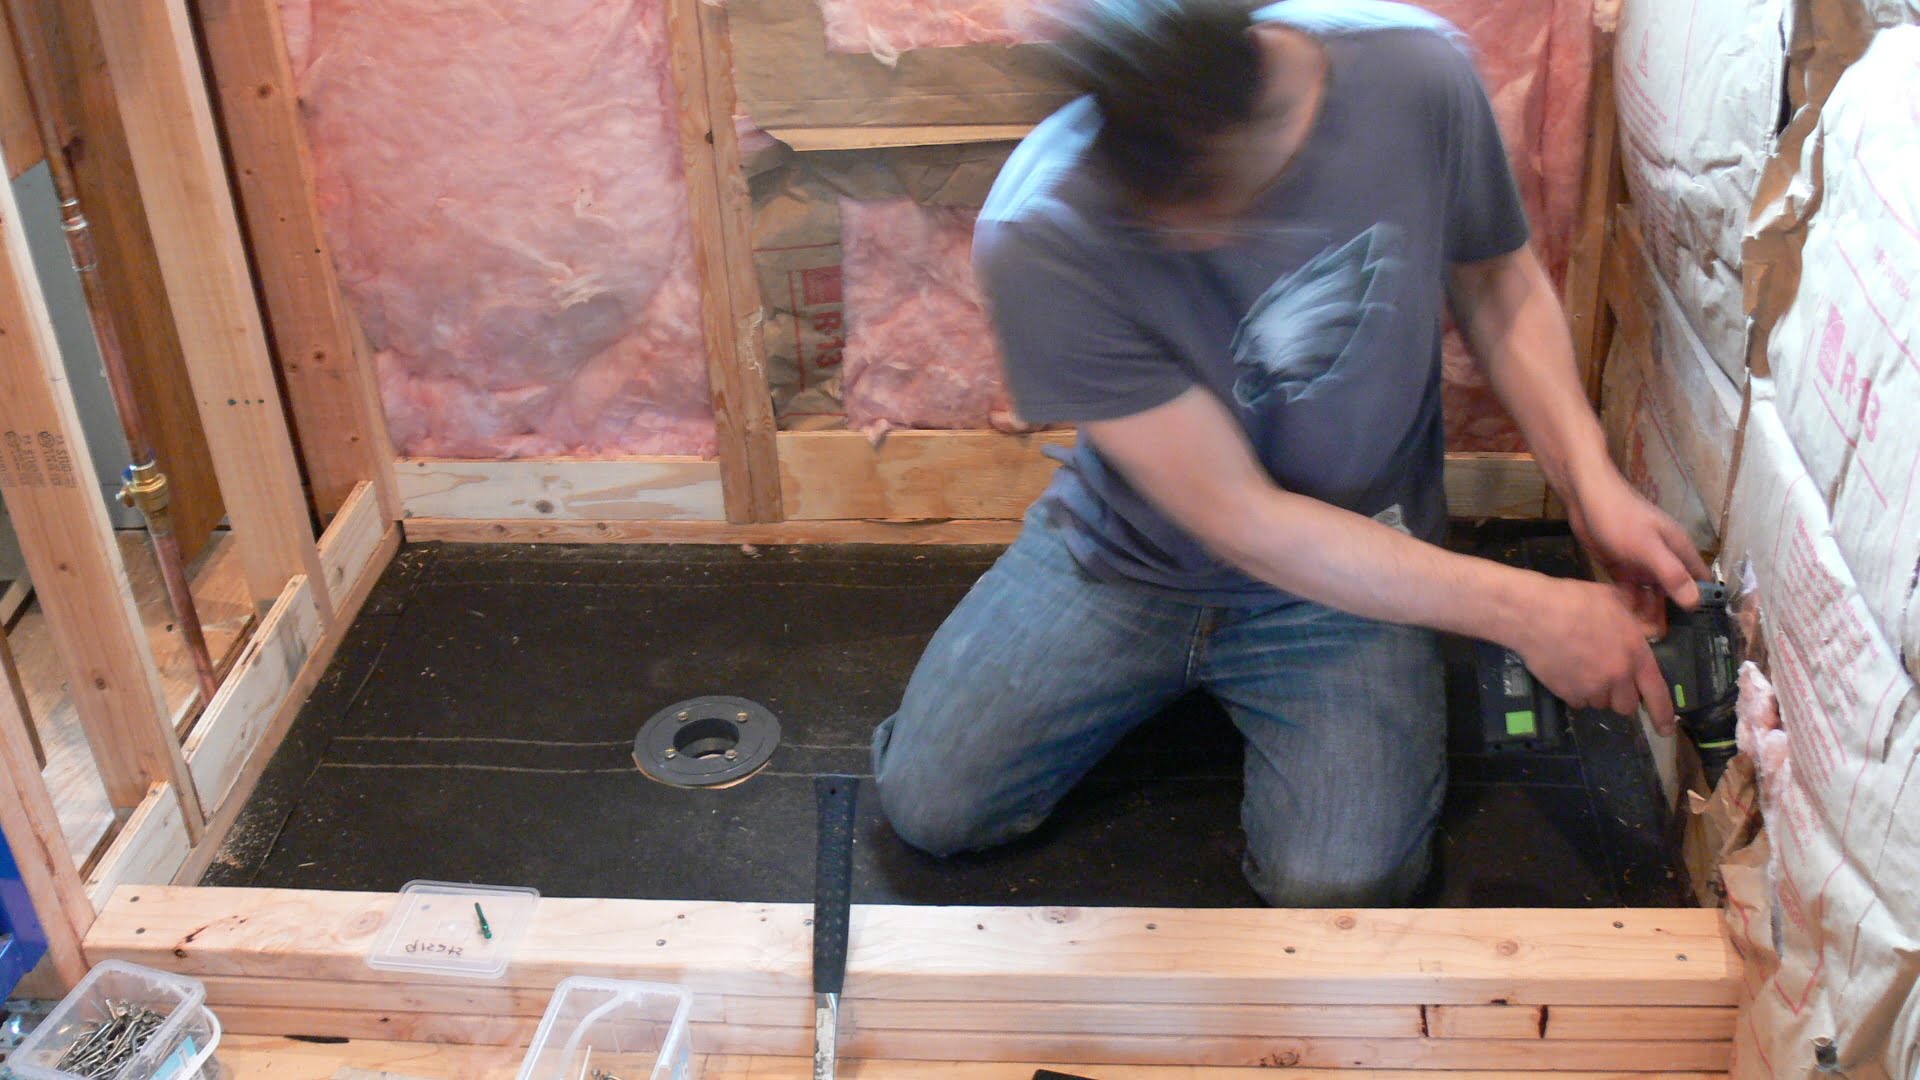 Build a shower curb frame using stacked 2 x 4s. Add blocking between wall studs to form shower pan "box".